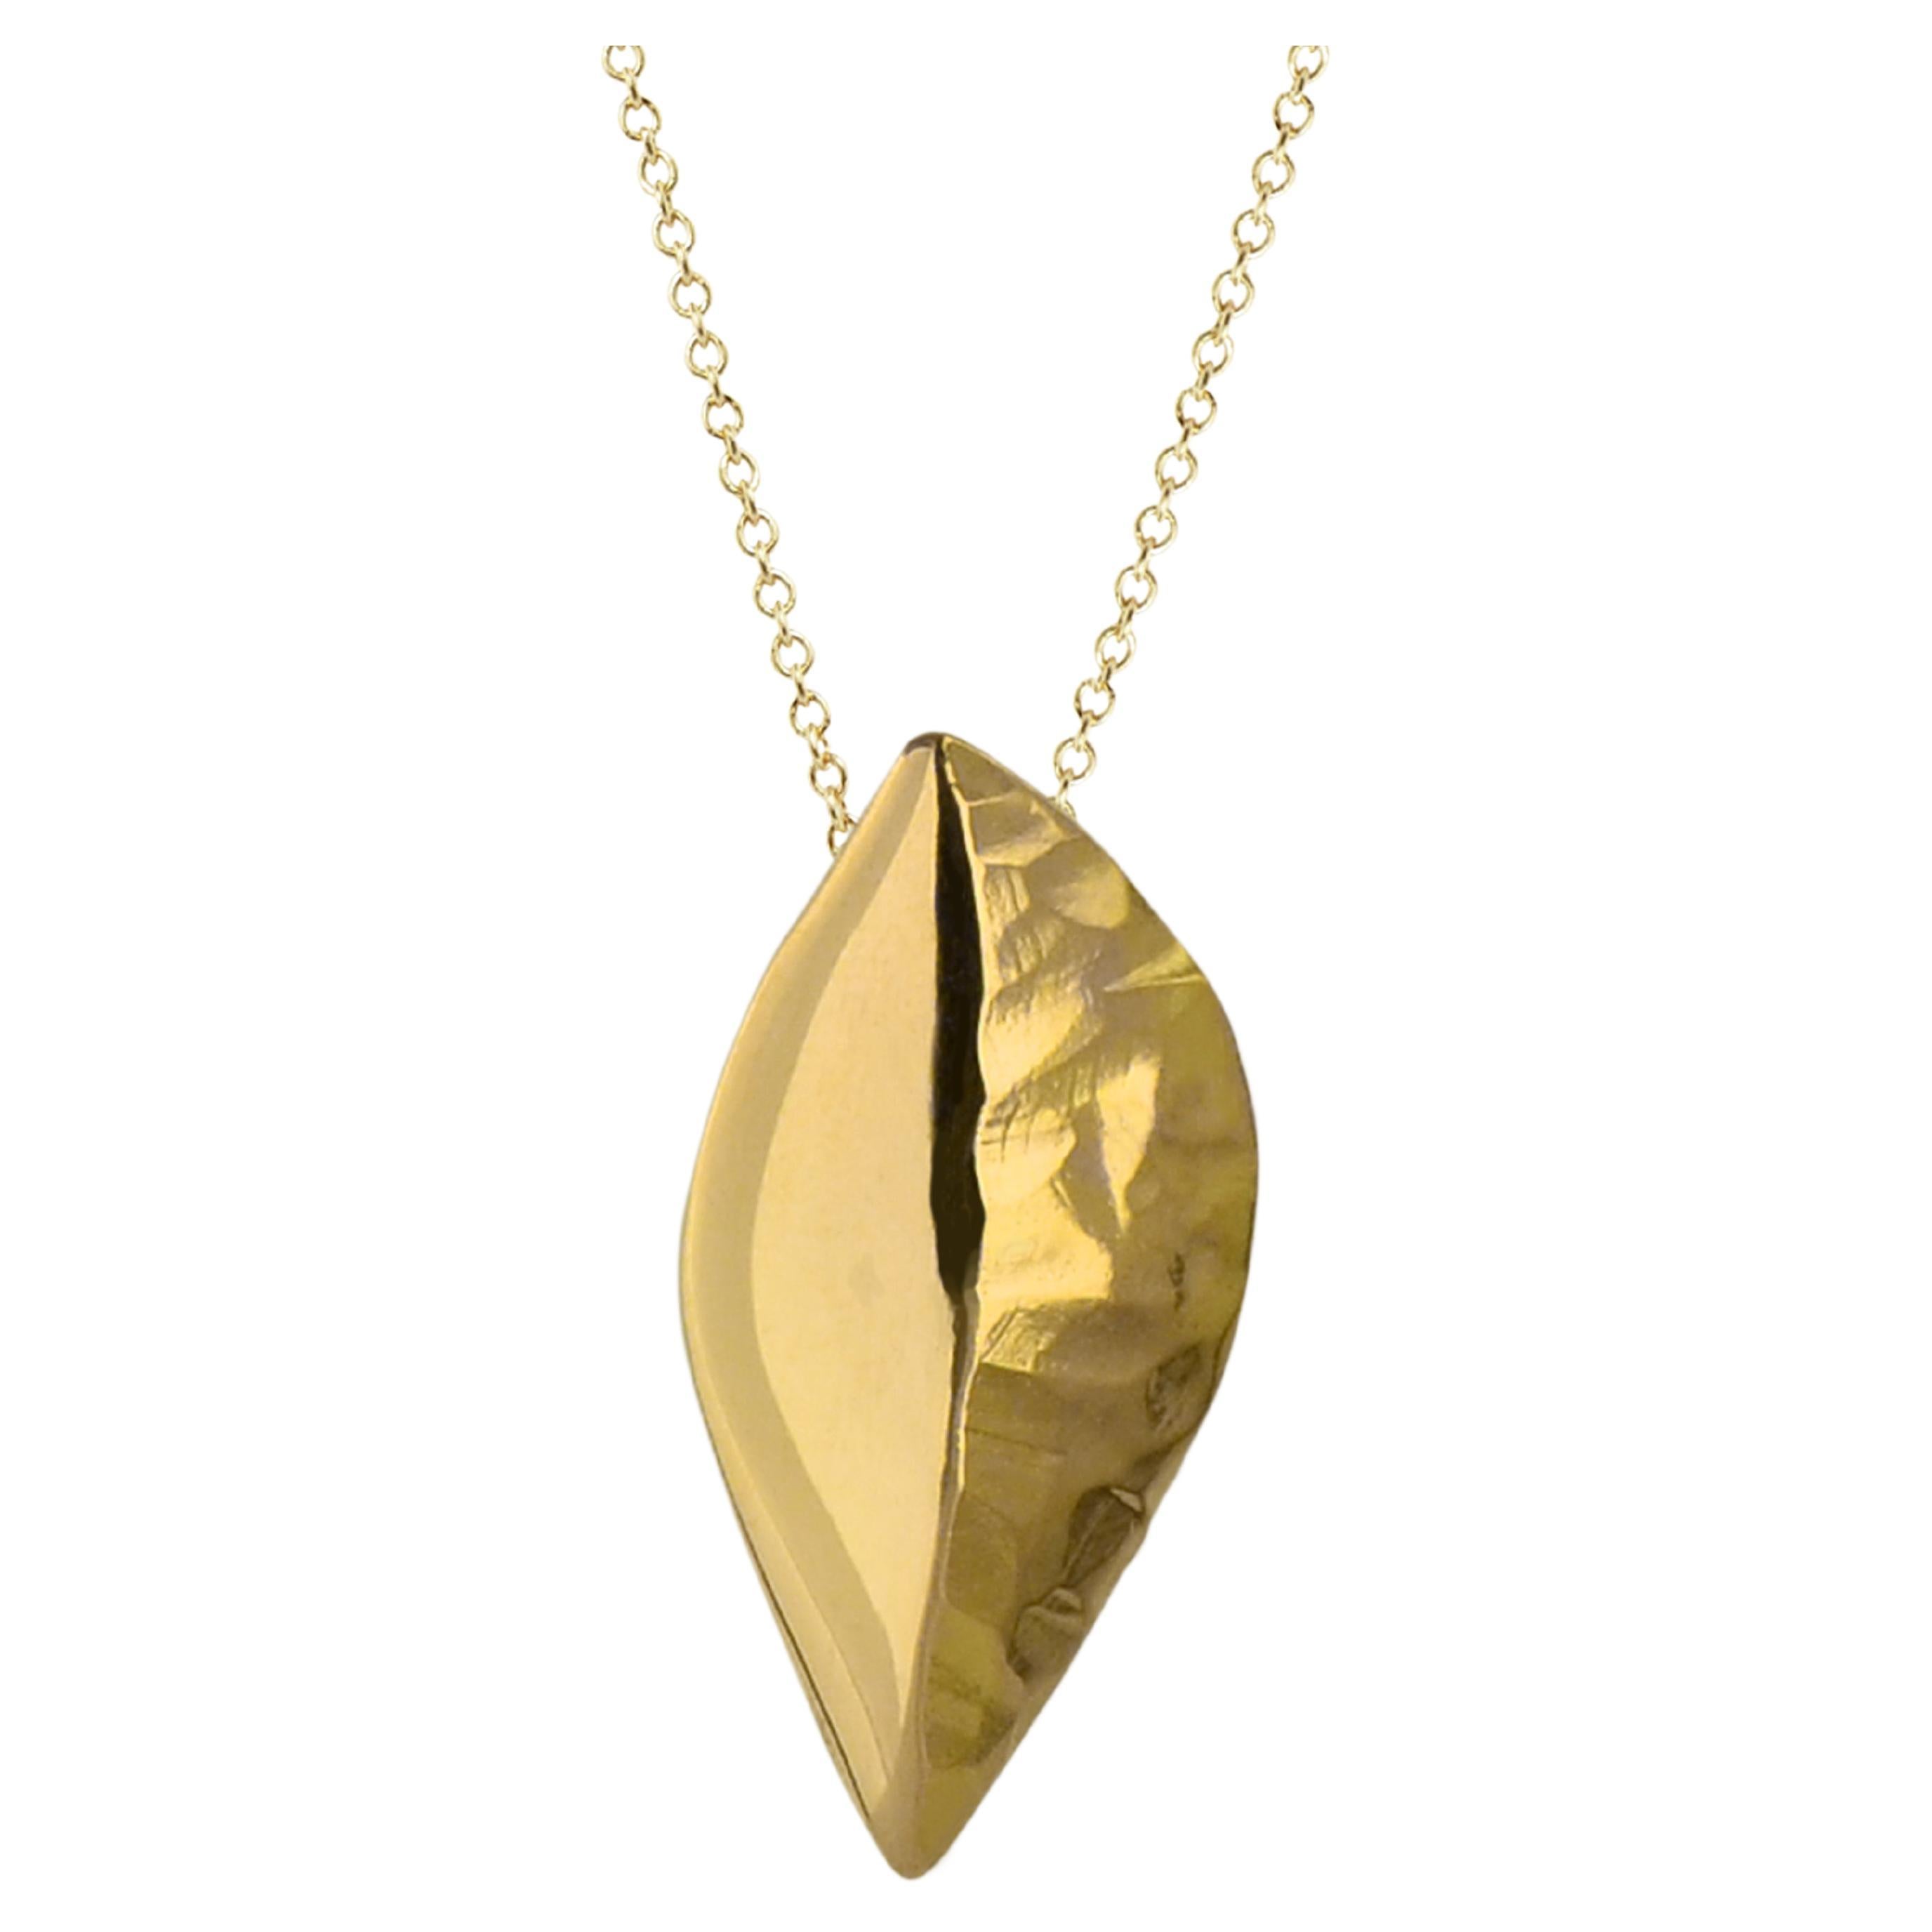 Susan Crow Studio Leaf Pendant With Chain In Certified FAIRMINED Yellow Gold For Sale